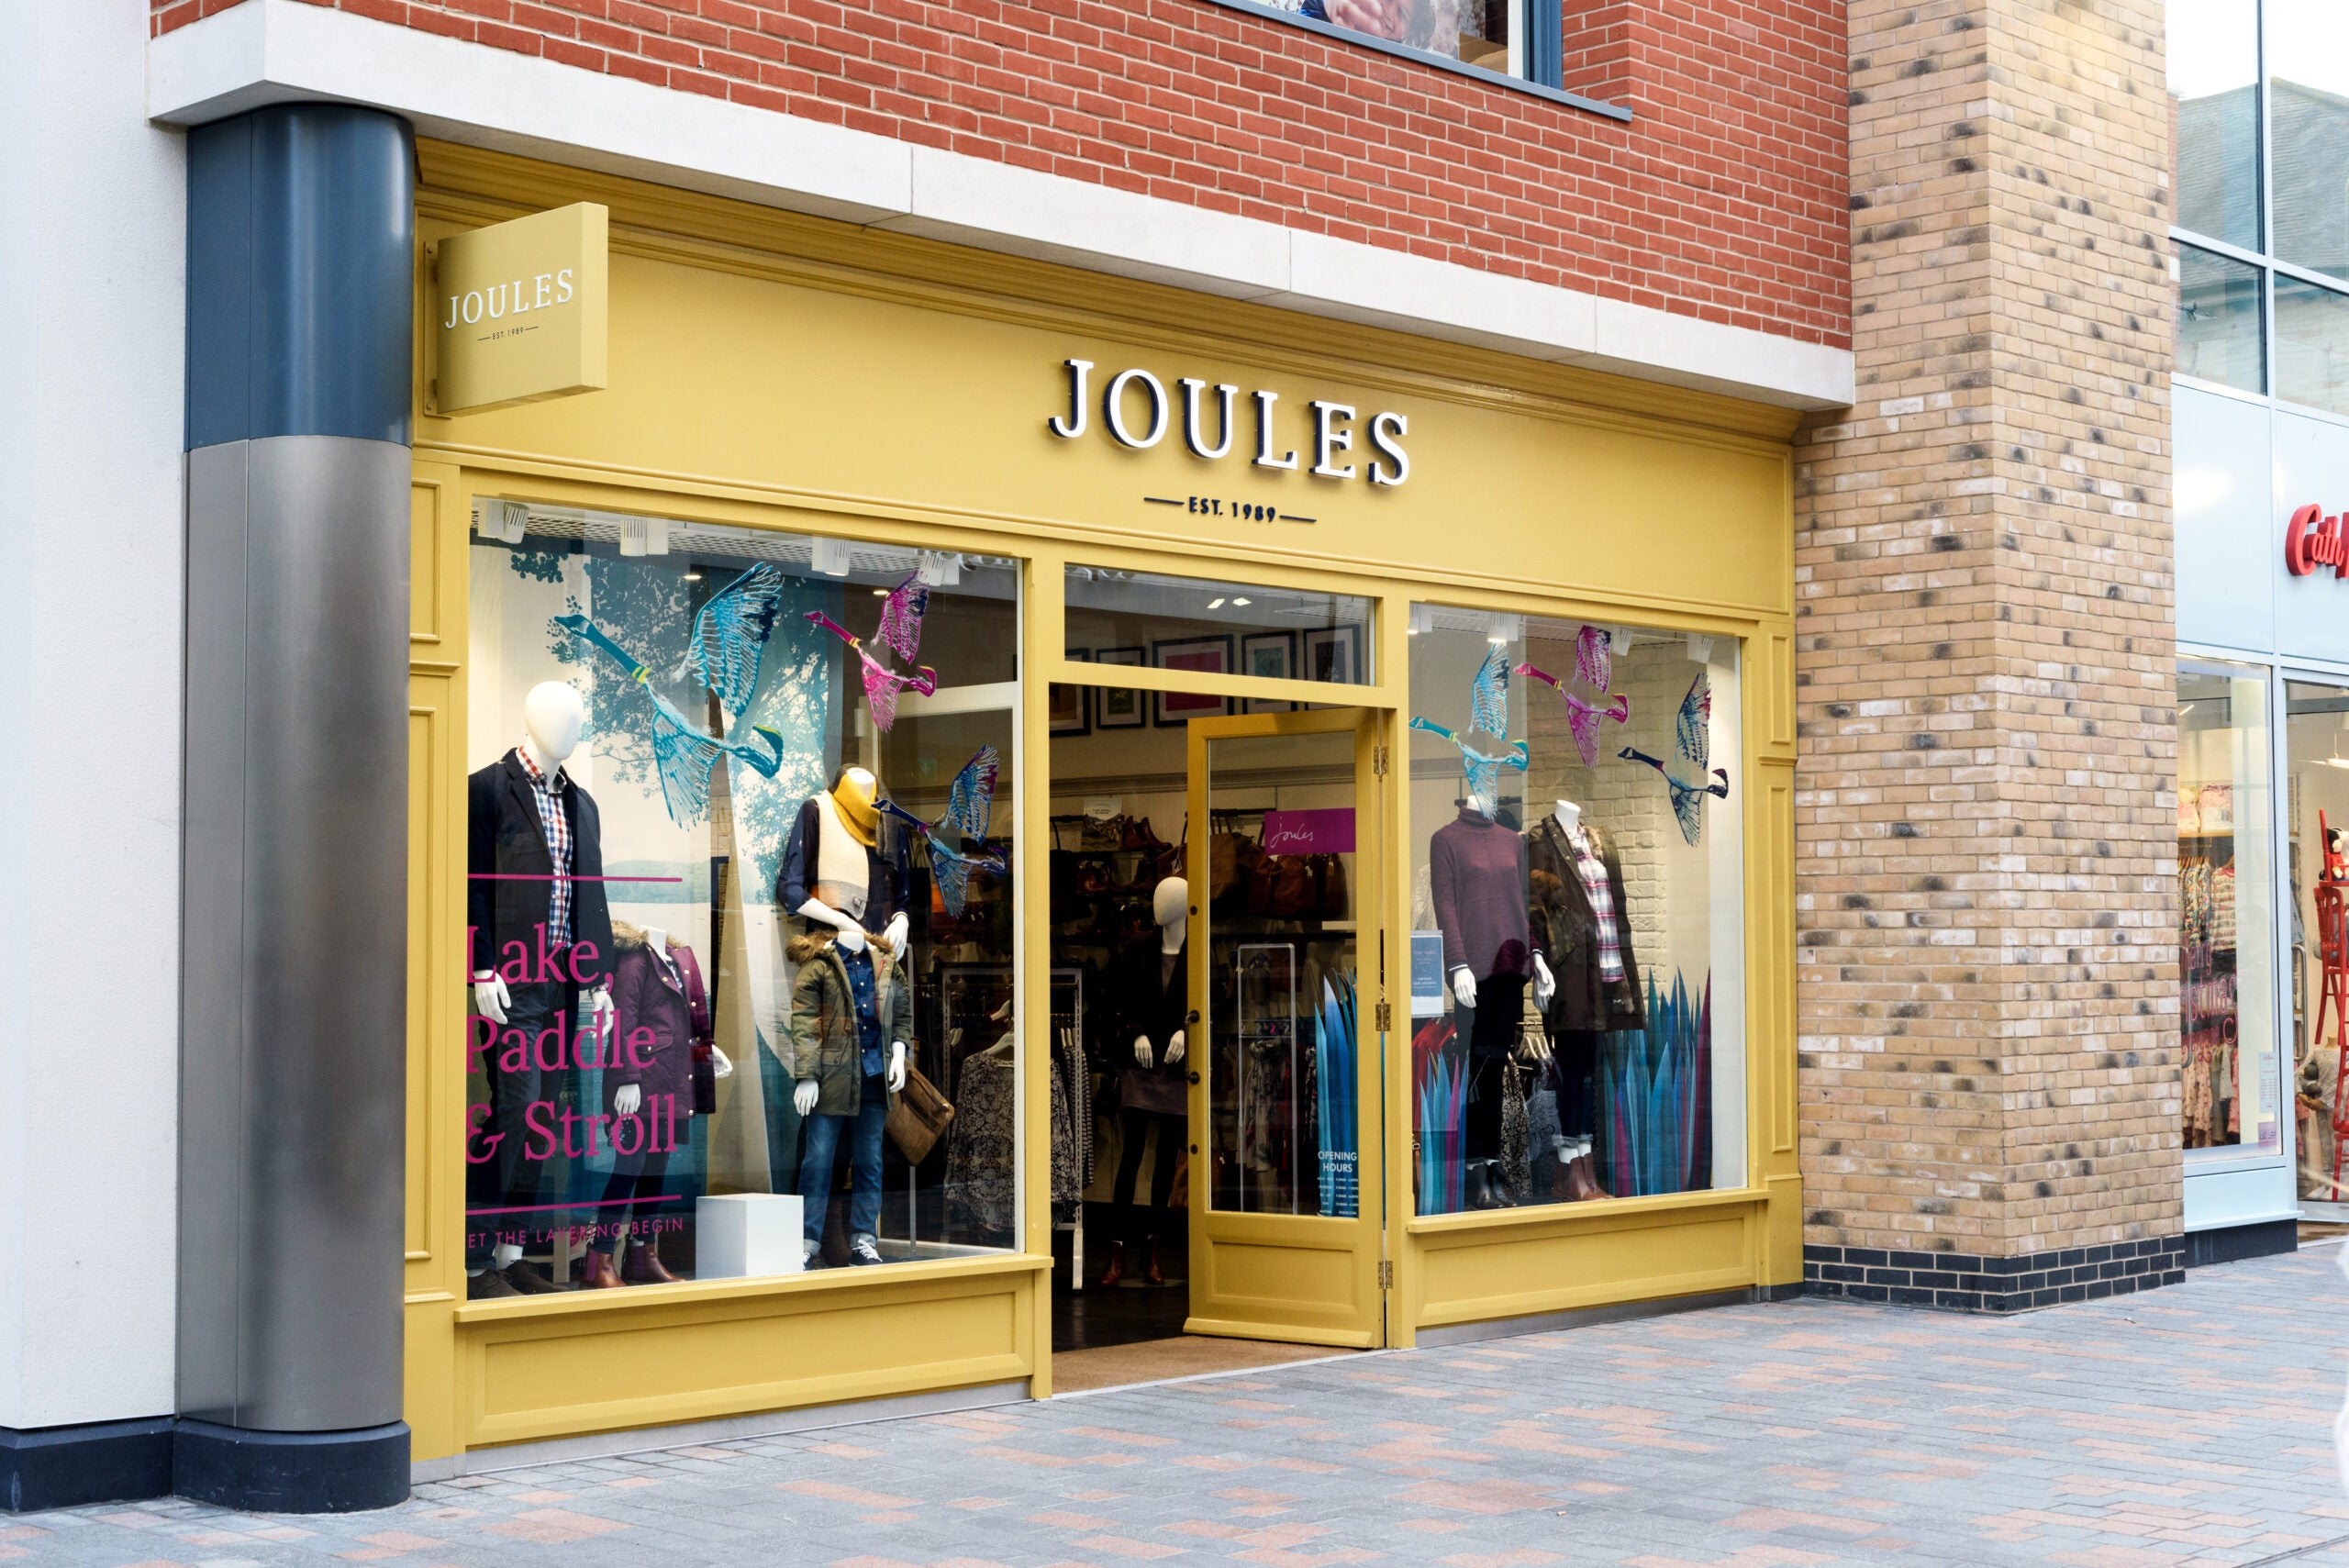 Next Plc in talks to take minority stake in Joules